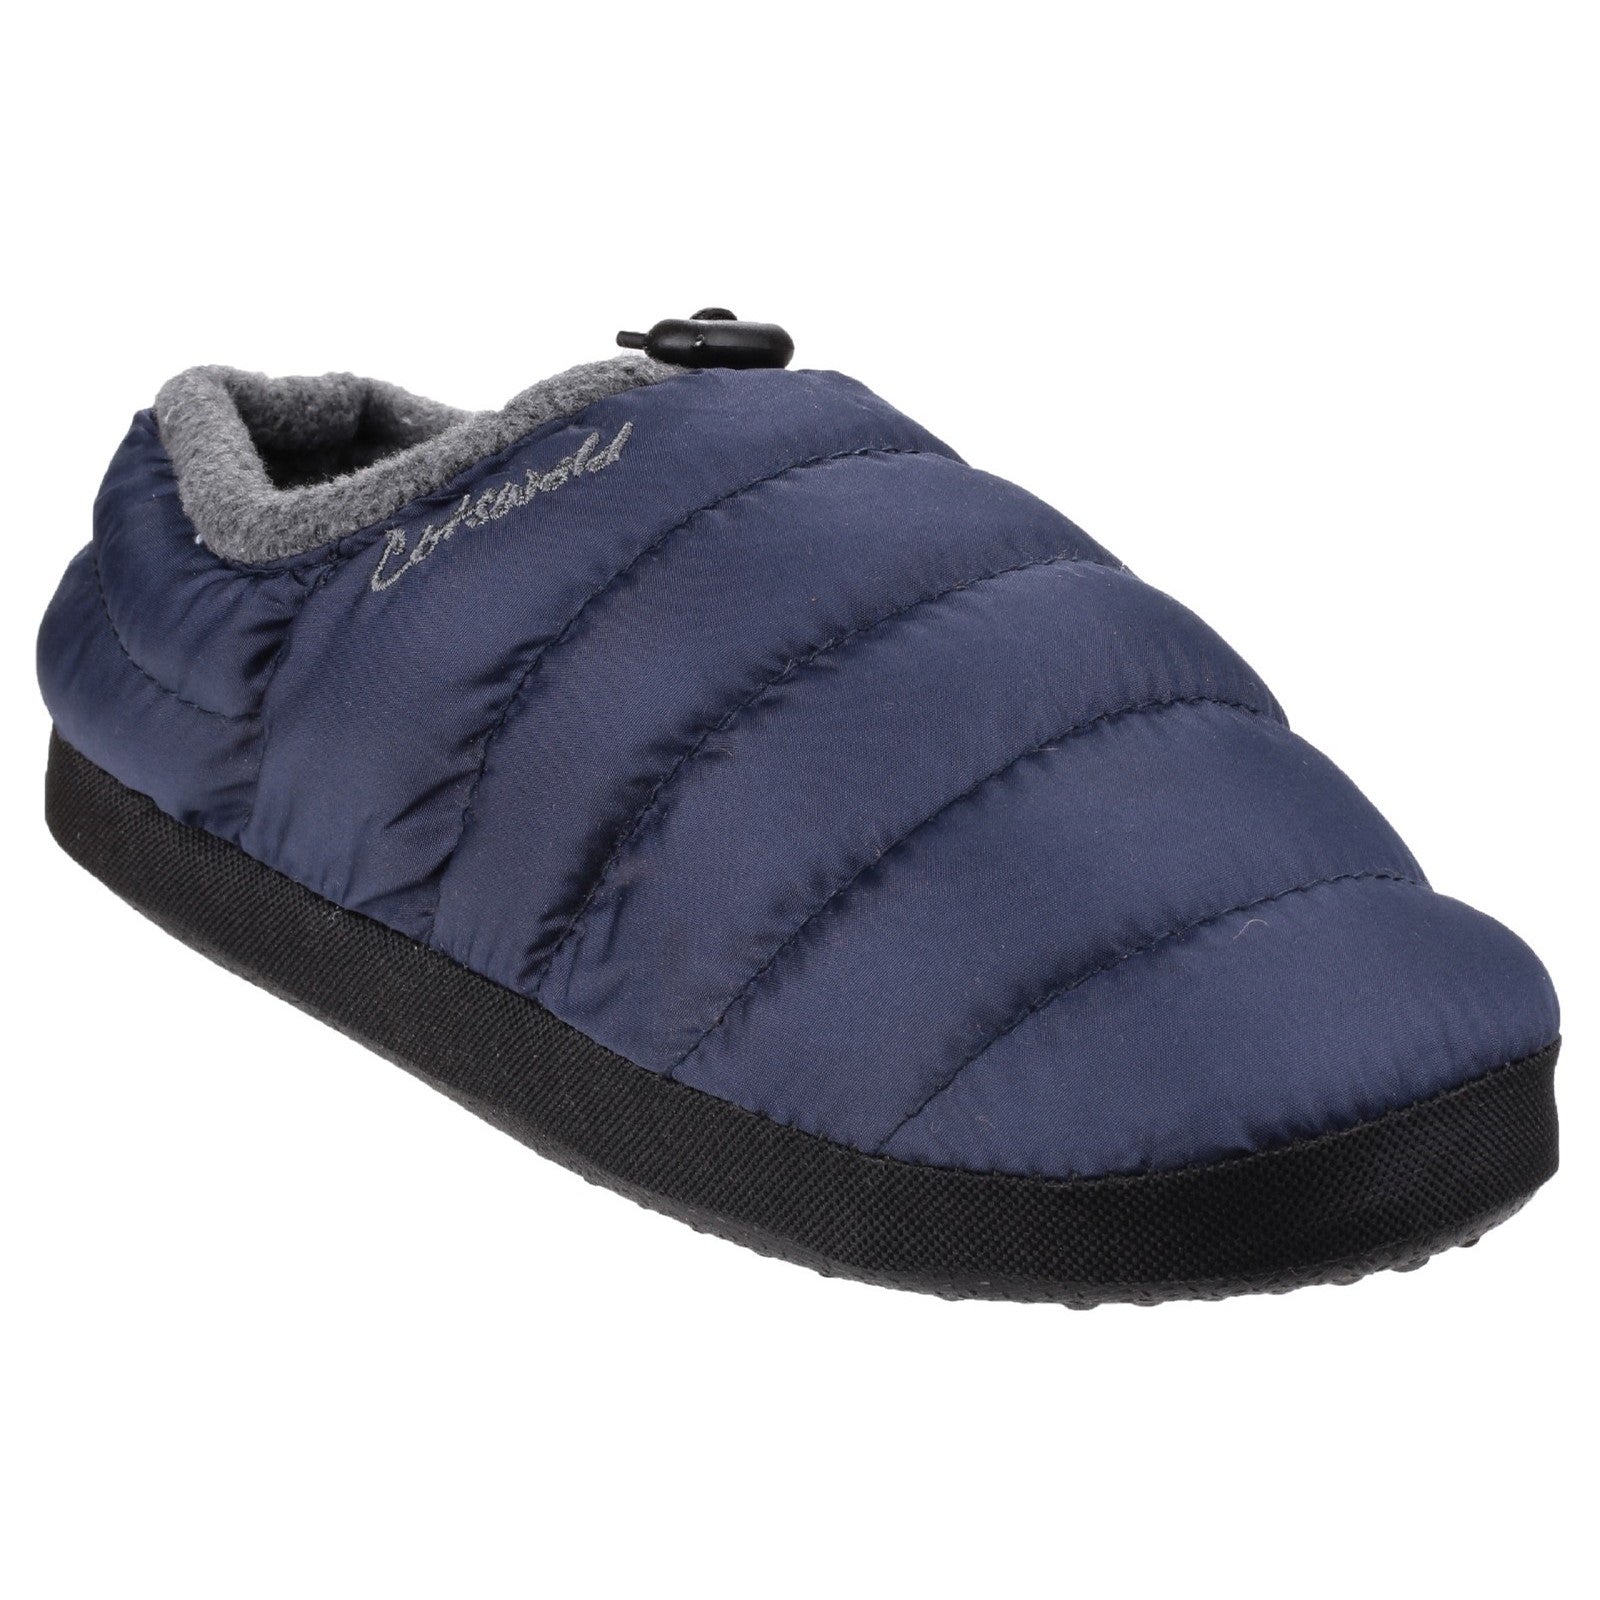 Cotswold Camping Slipper Jnr